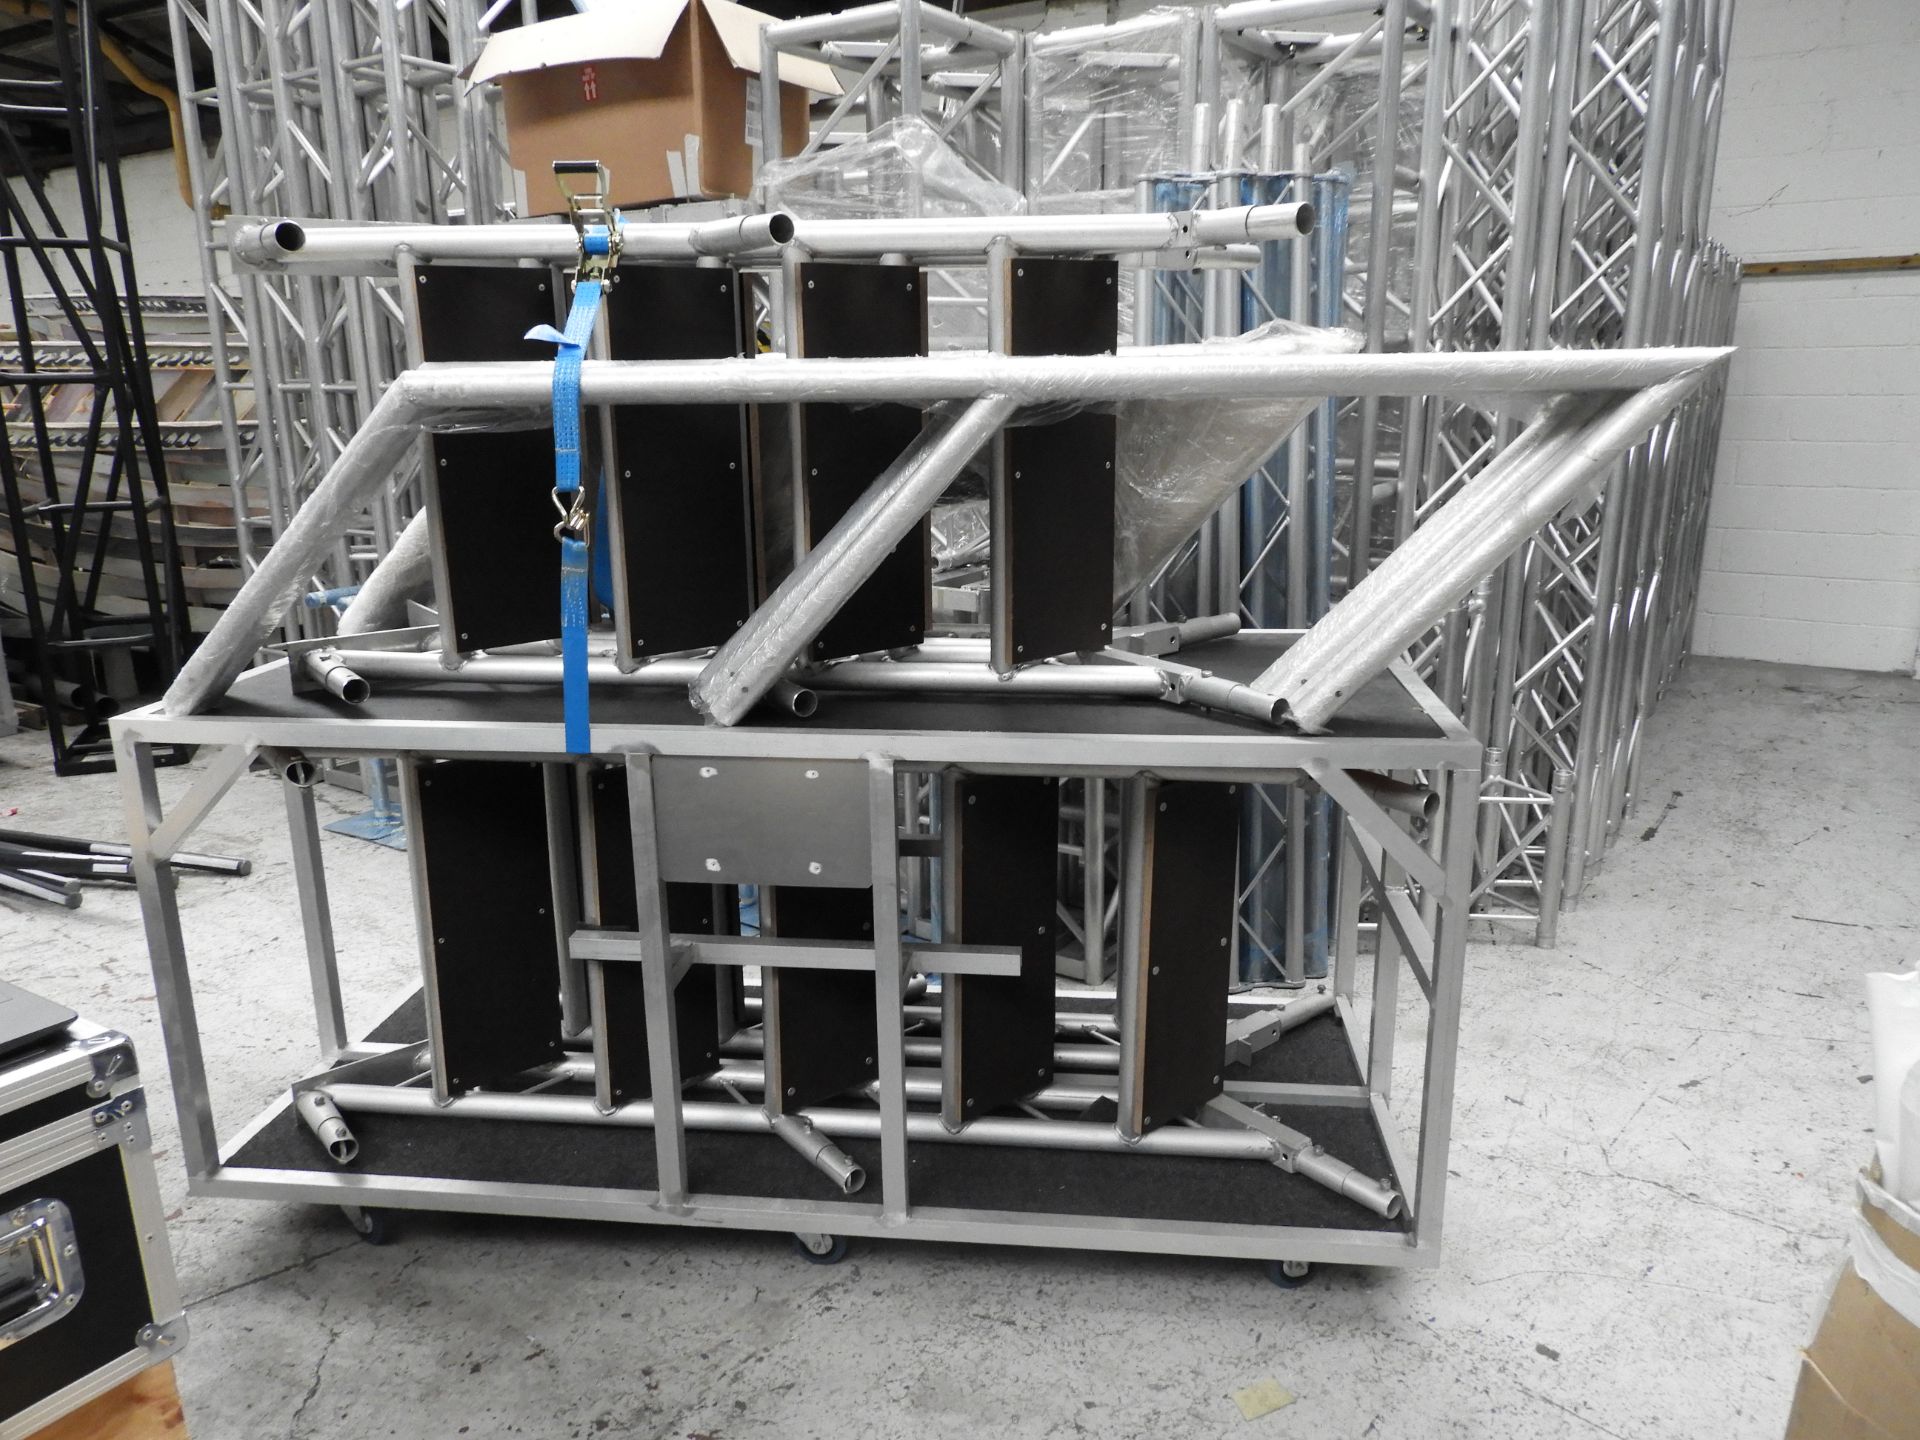 pair of treds in transport cage with handrails for a 4' stage